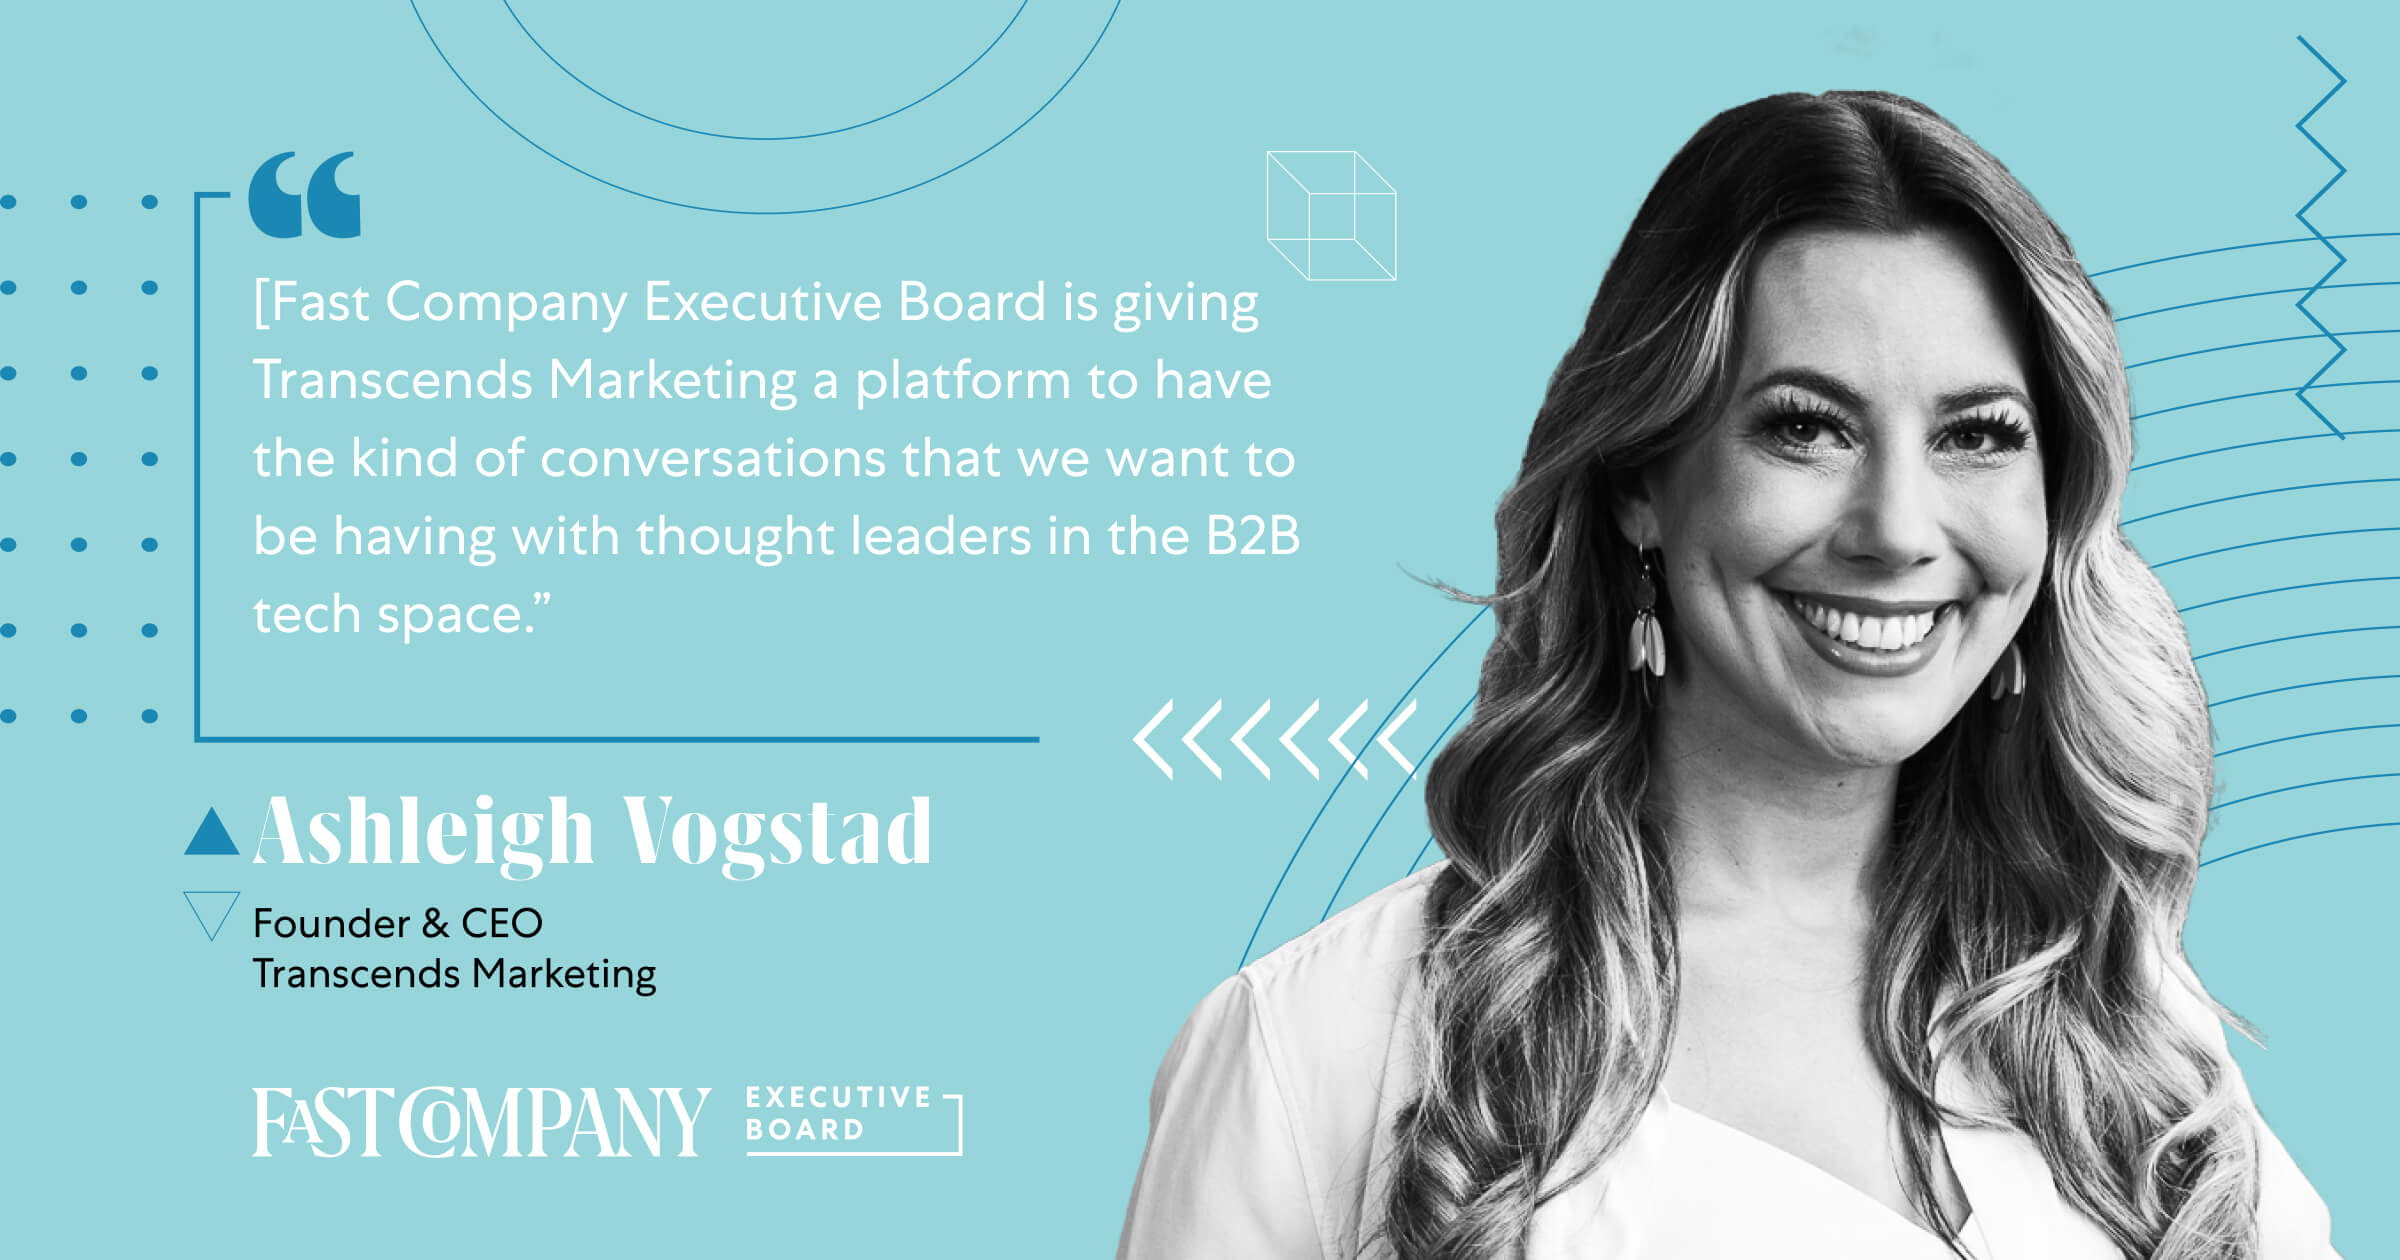 Fast Company Gives Ashleigh Vogstad a Platform to Connect With Other B2B Thought Leaders